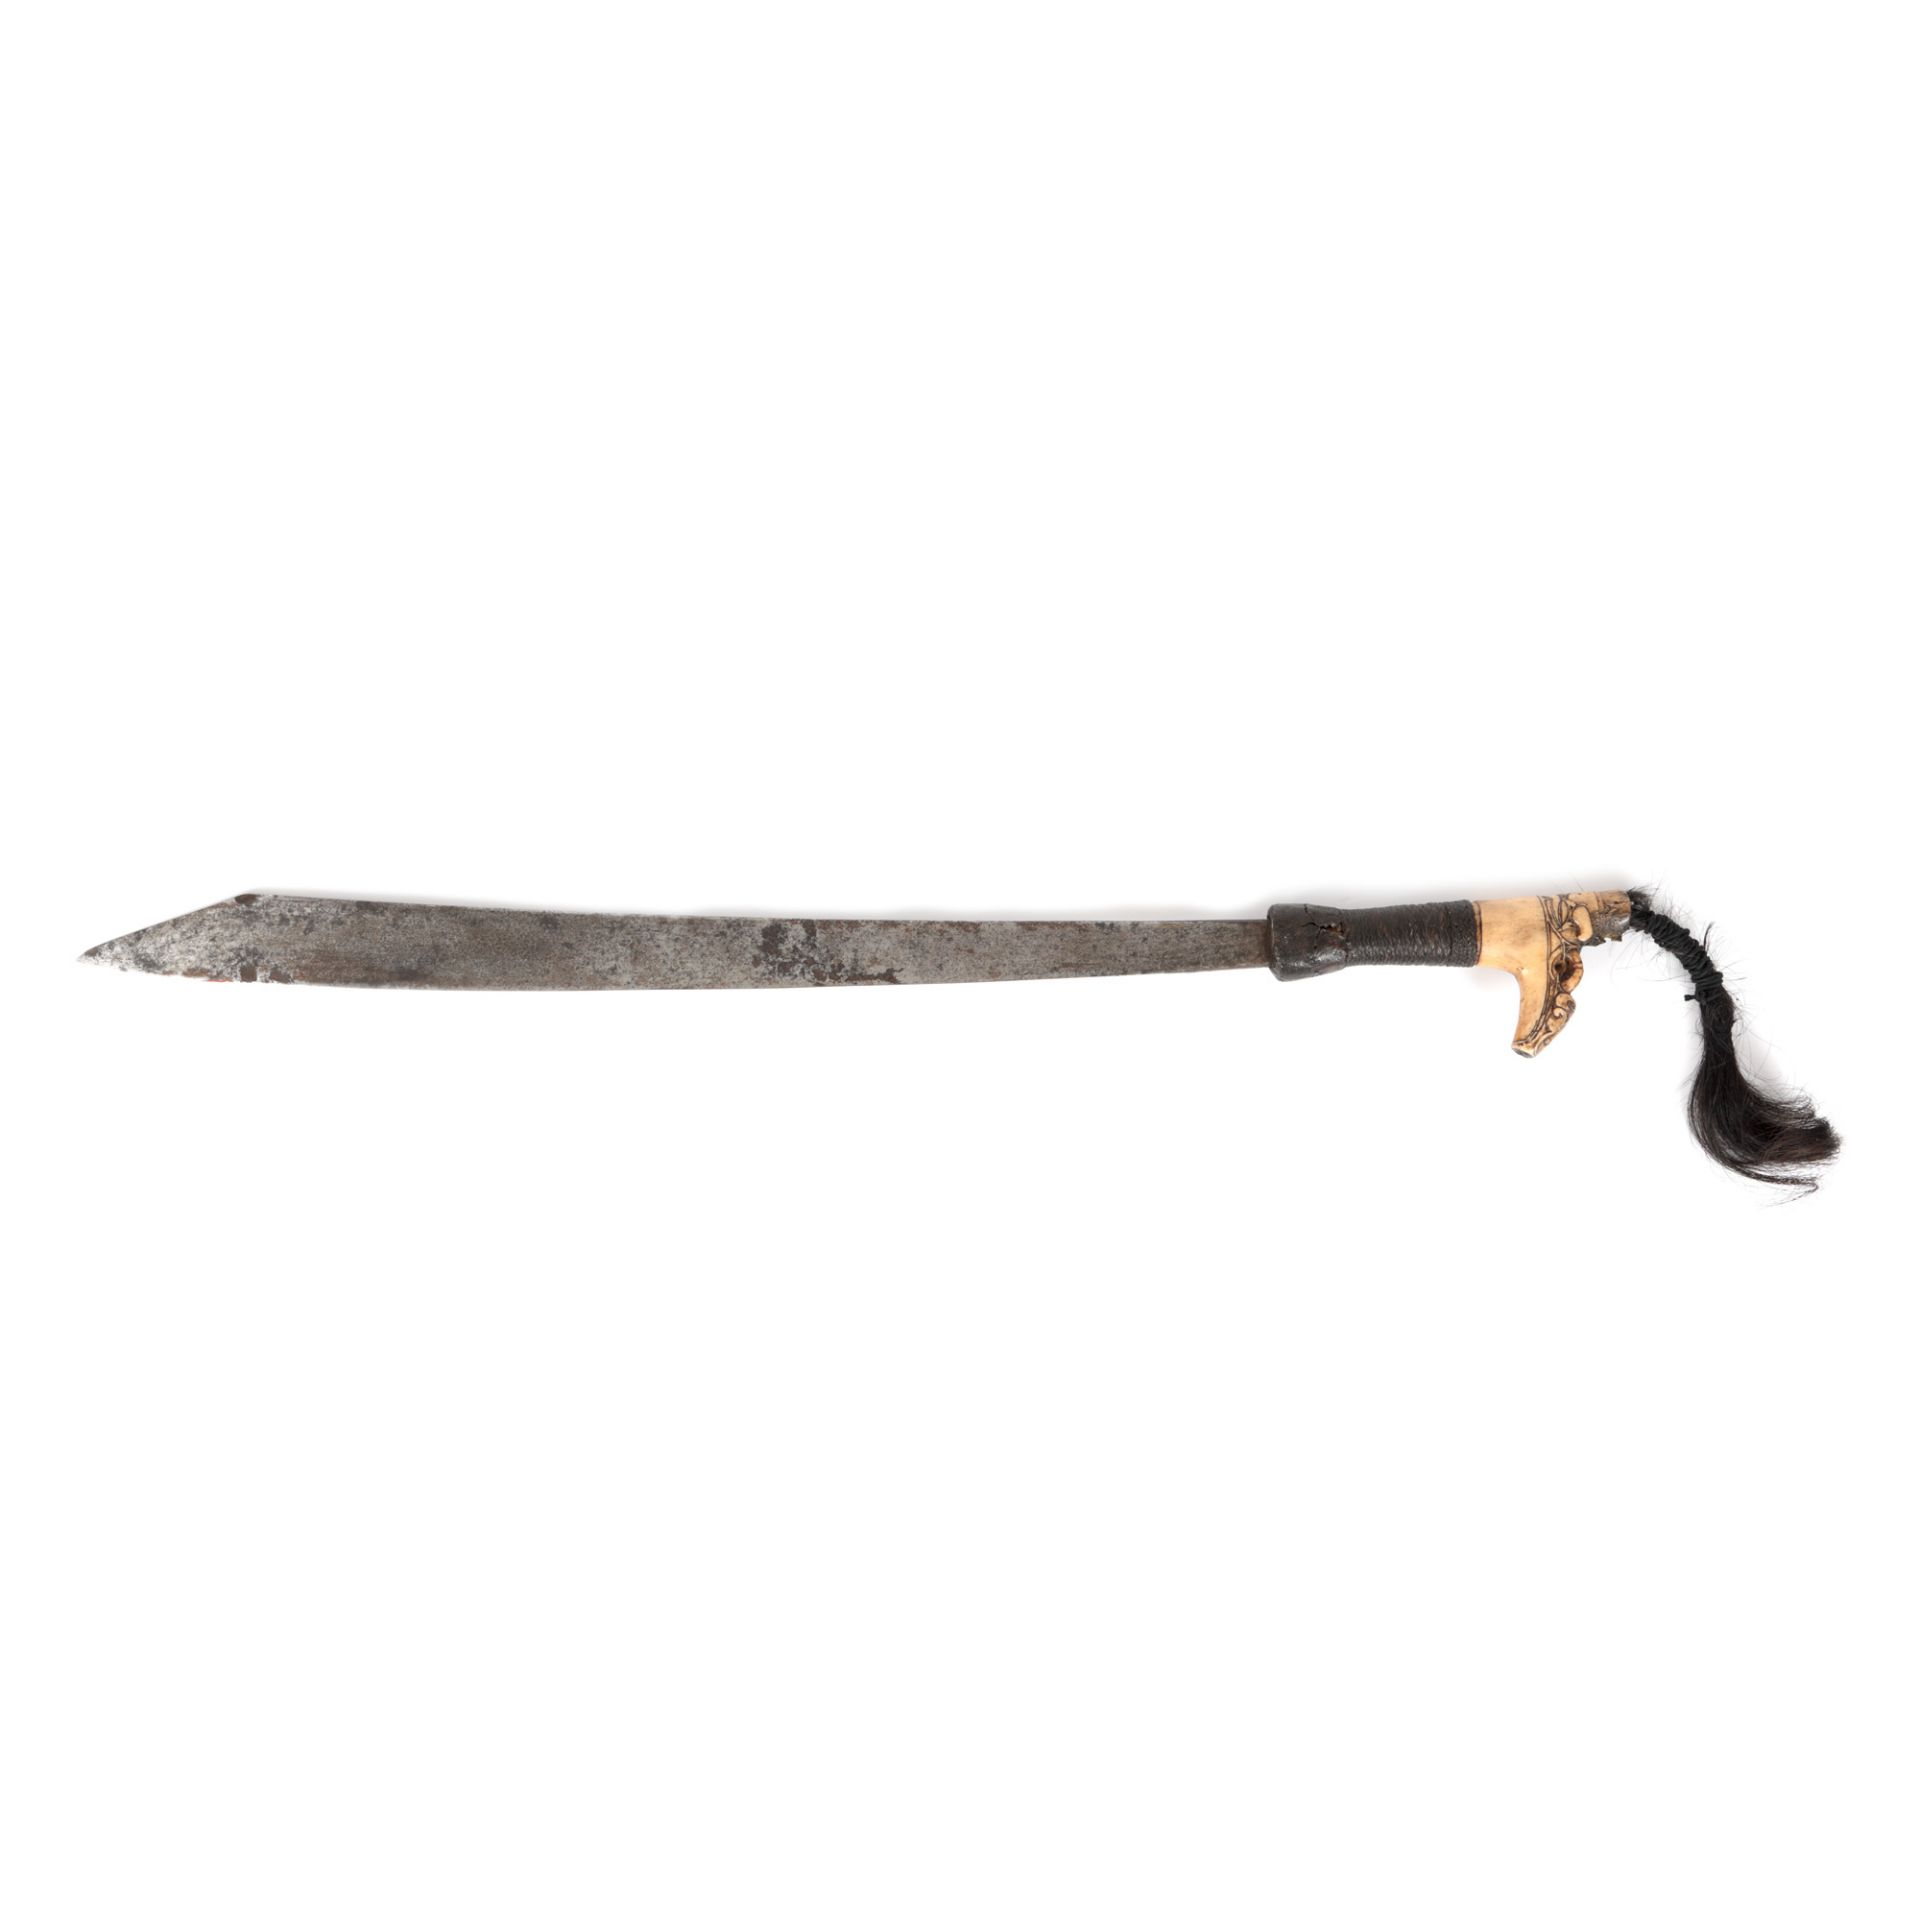 Parang Ilang, traditional sword of the Dayak people, Borneo, 18th-19th century - Image 2 of 4